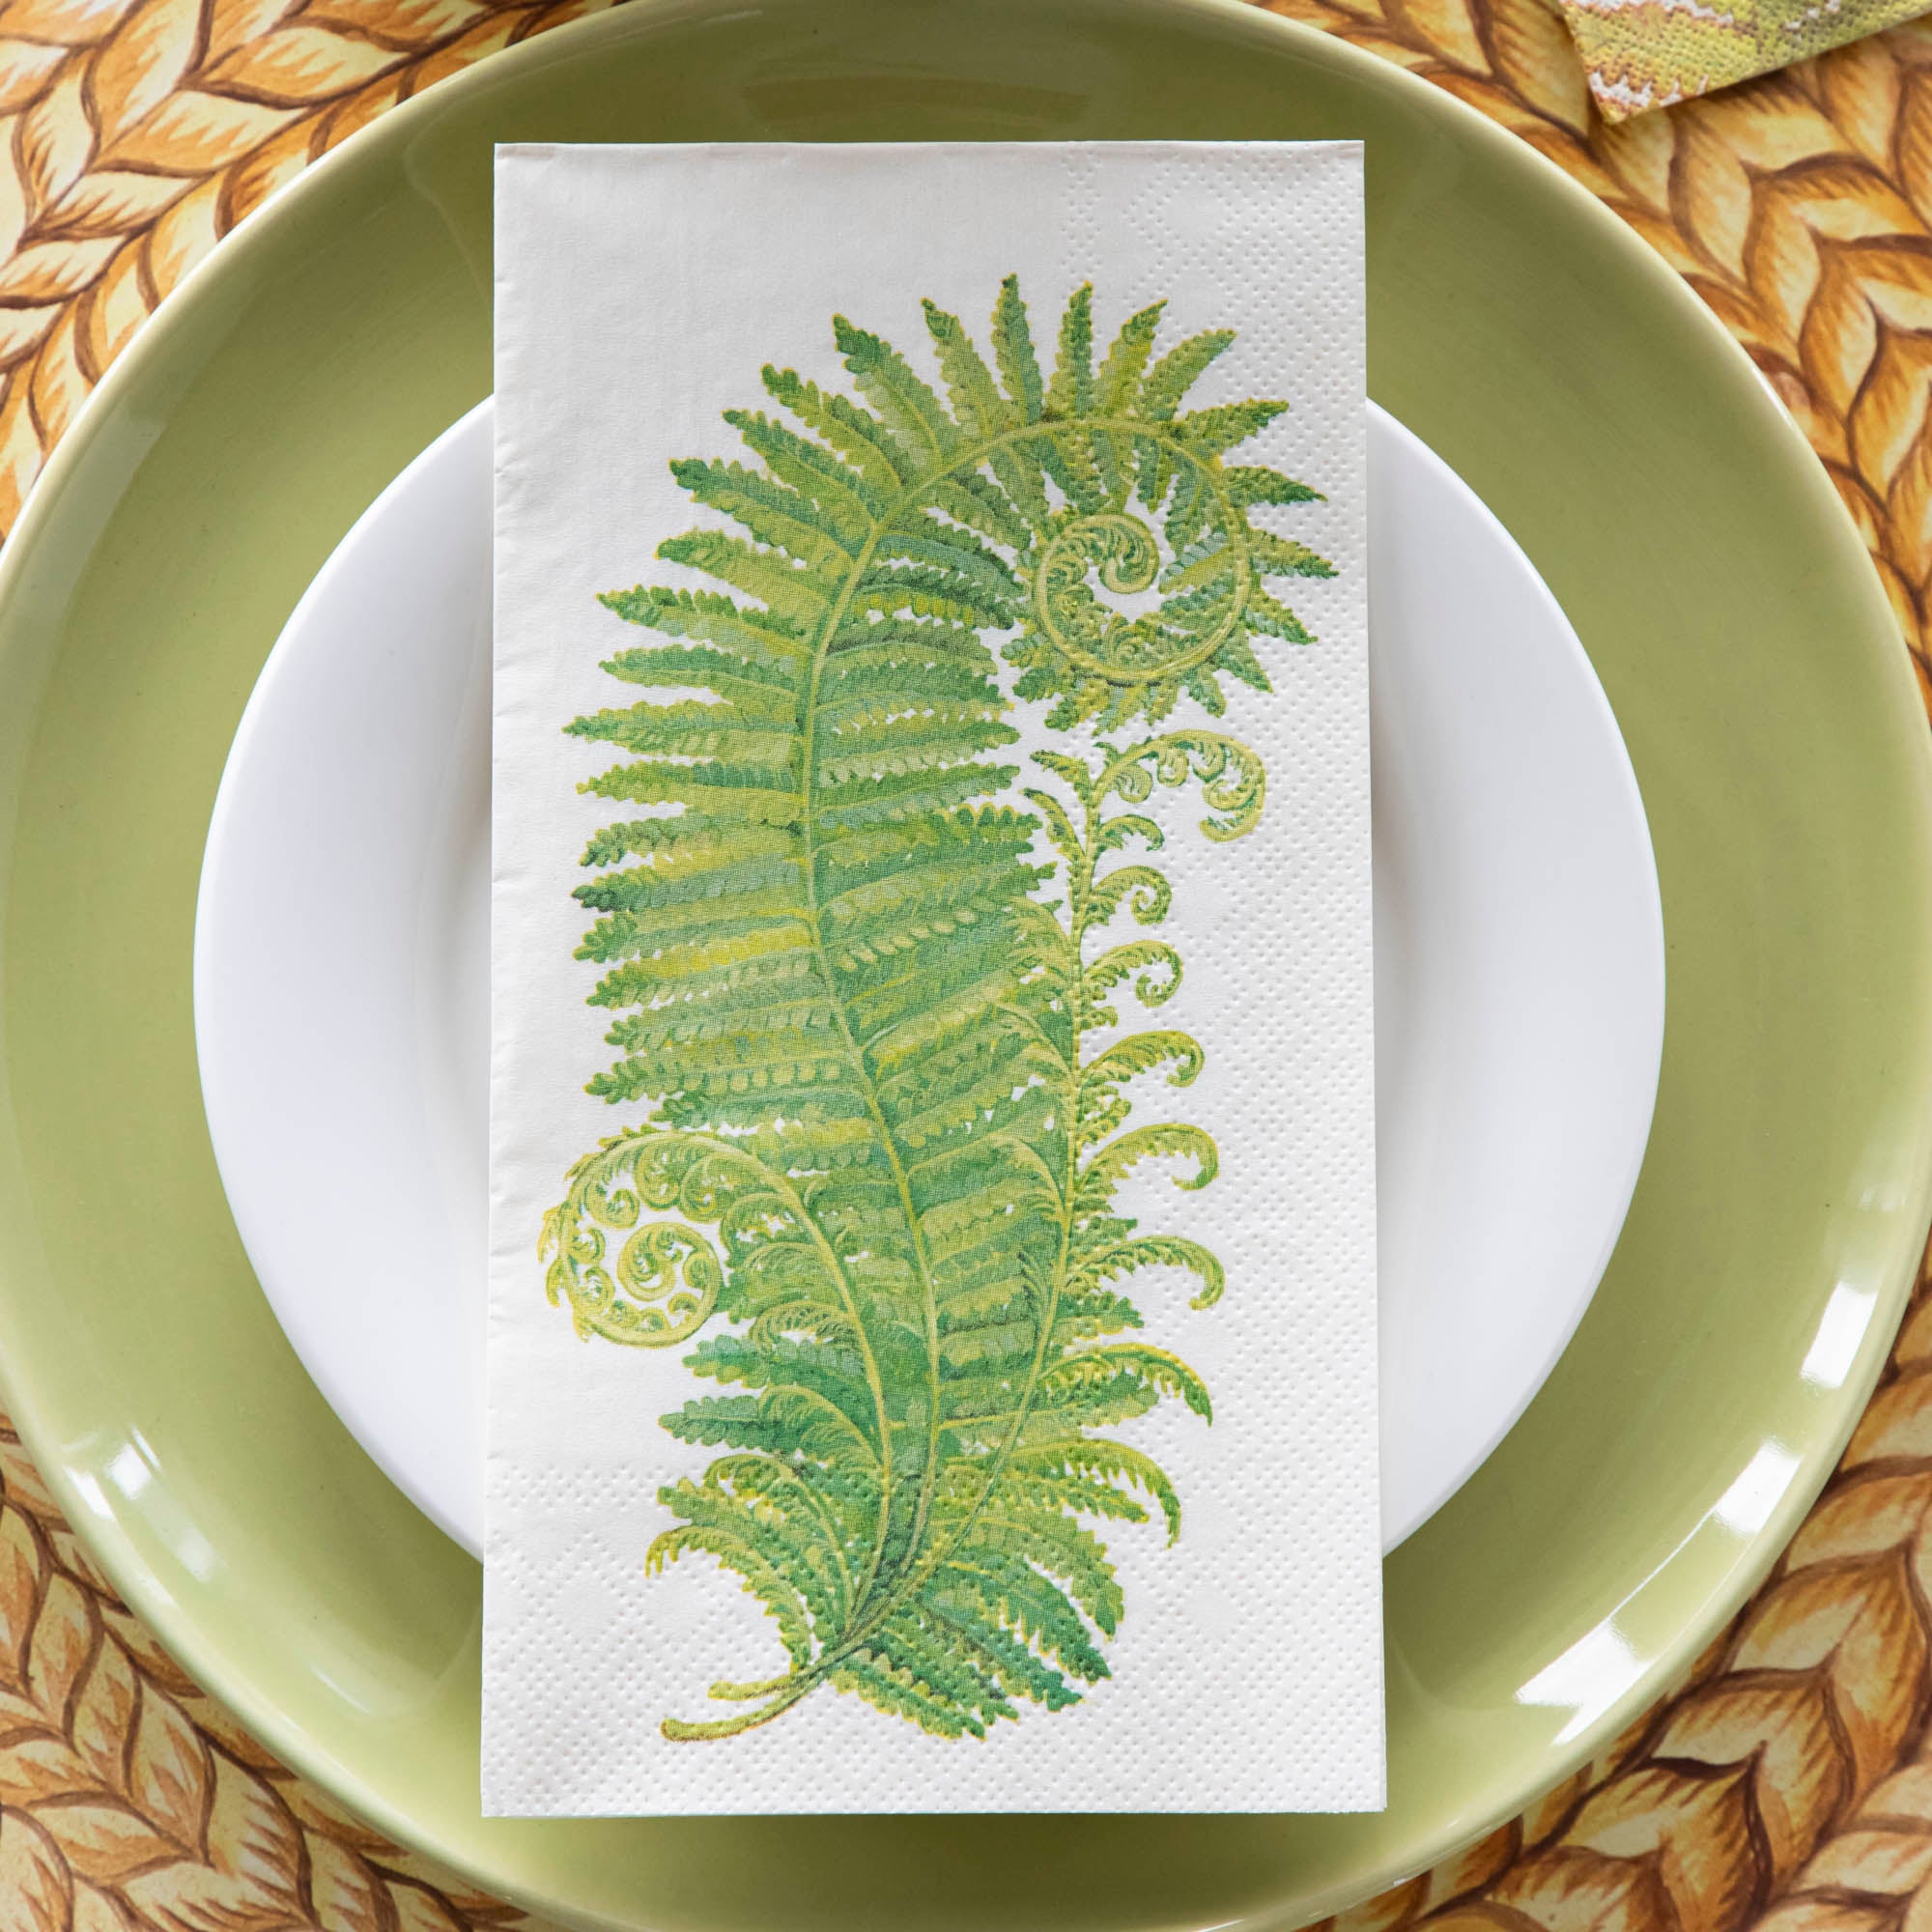 Hester &amp; Cook Fern Napkin on a plate in Germany.